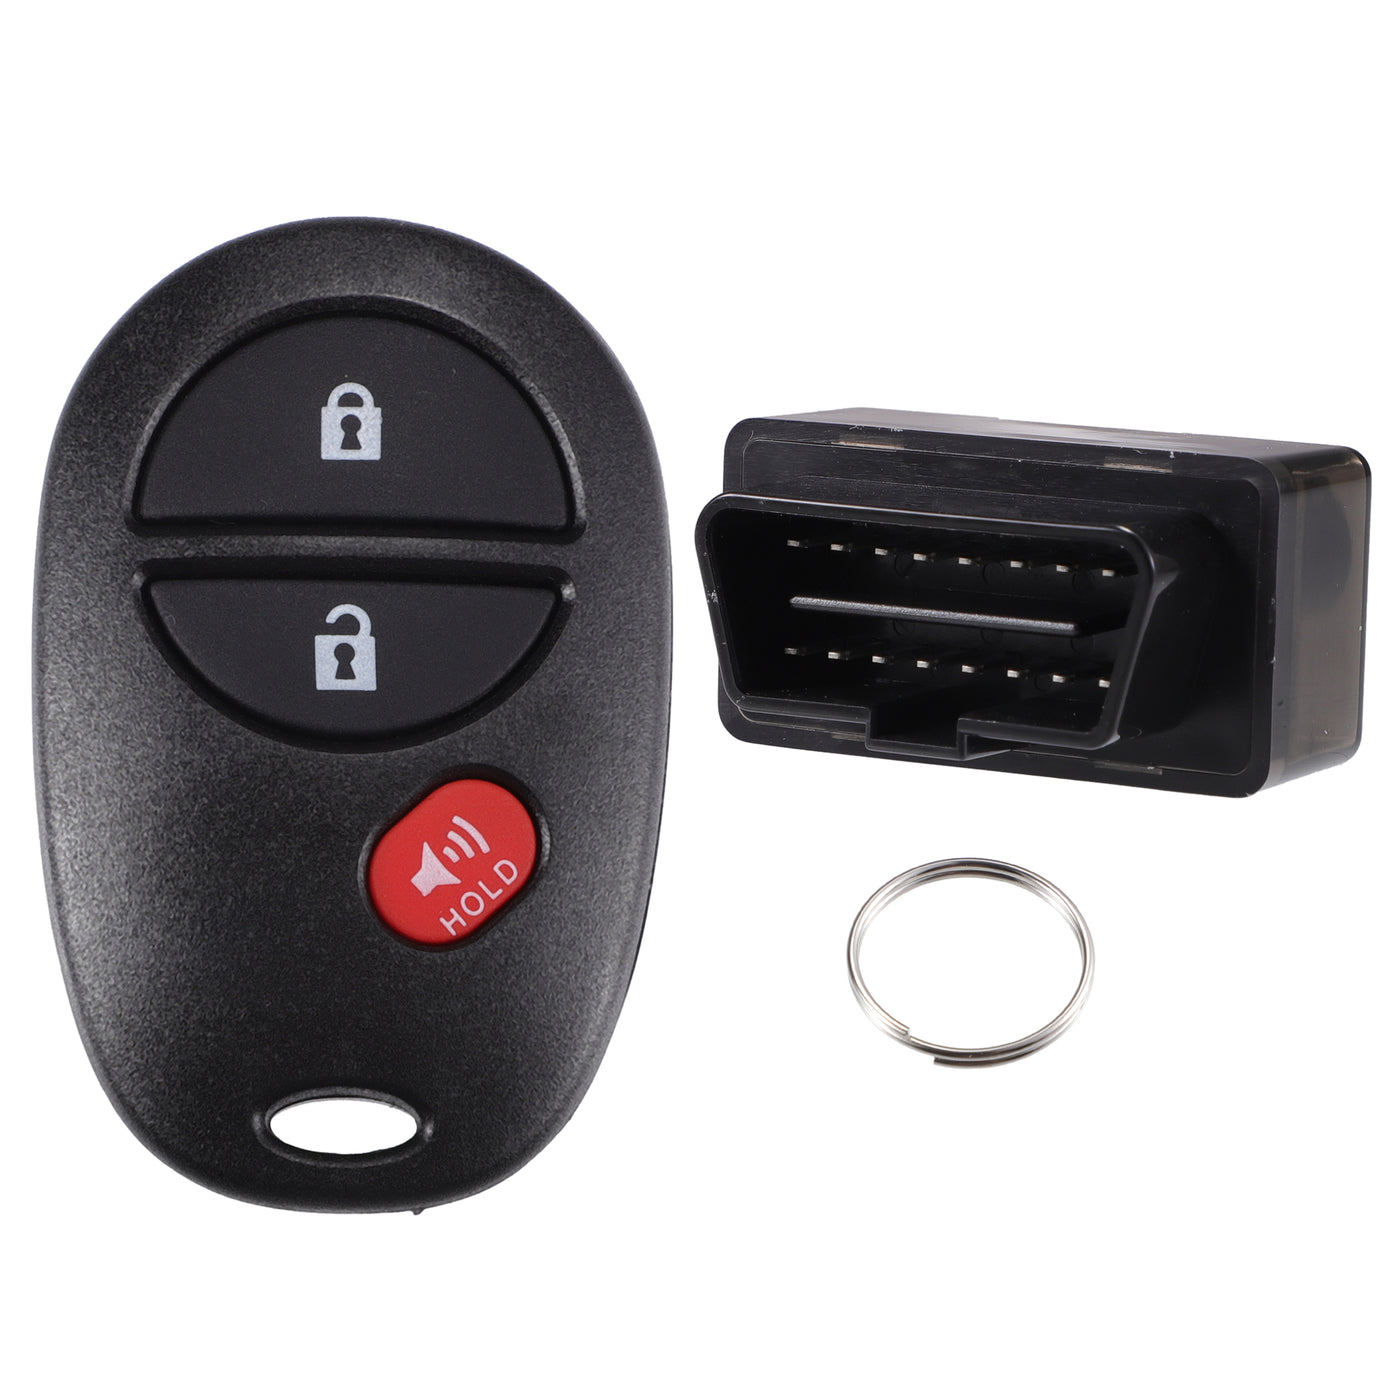 X AUTOHAUX Key Programmer with Keyless Entry Remote Key Fob Replacement Fit for Toyota Tacoma Tundra Sequoia Highlander Sienna GQ43VT20T 315Mhz with Chip 3 Button OBD2 Tool